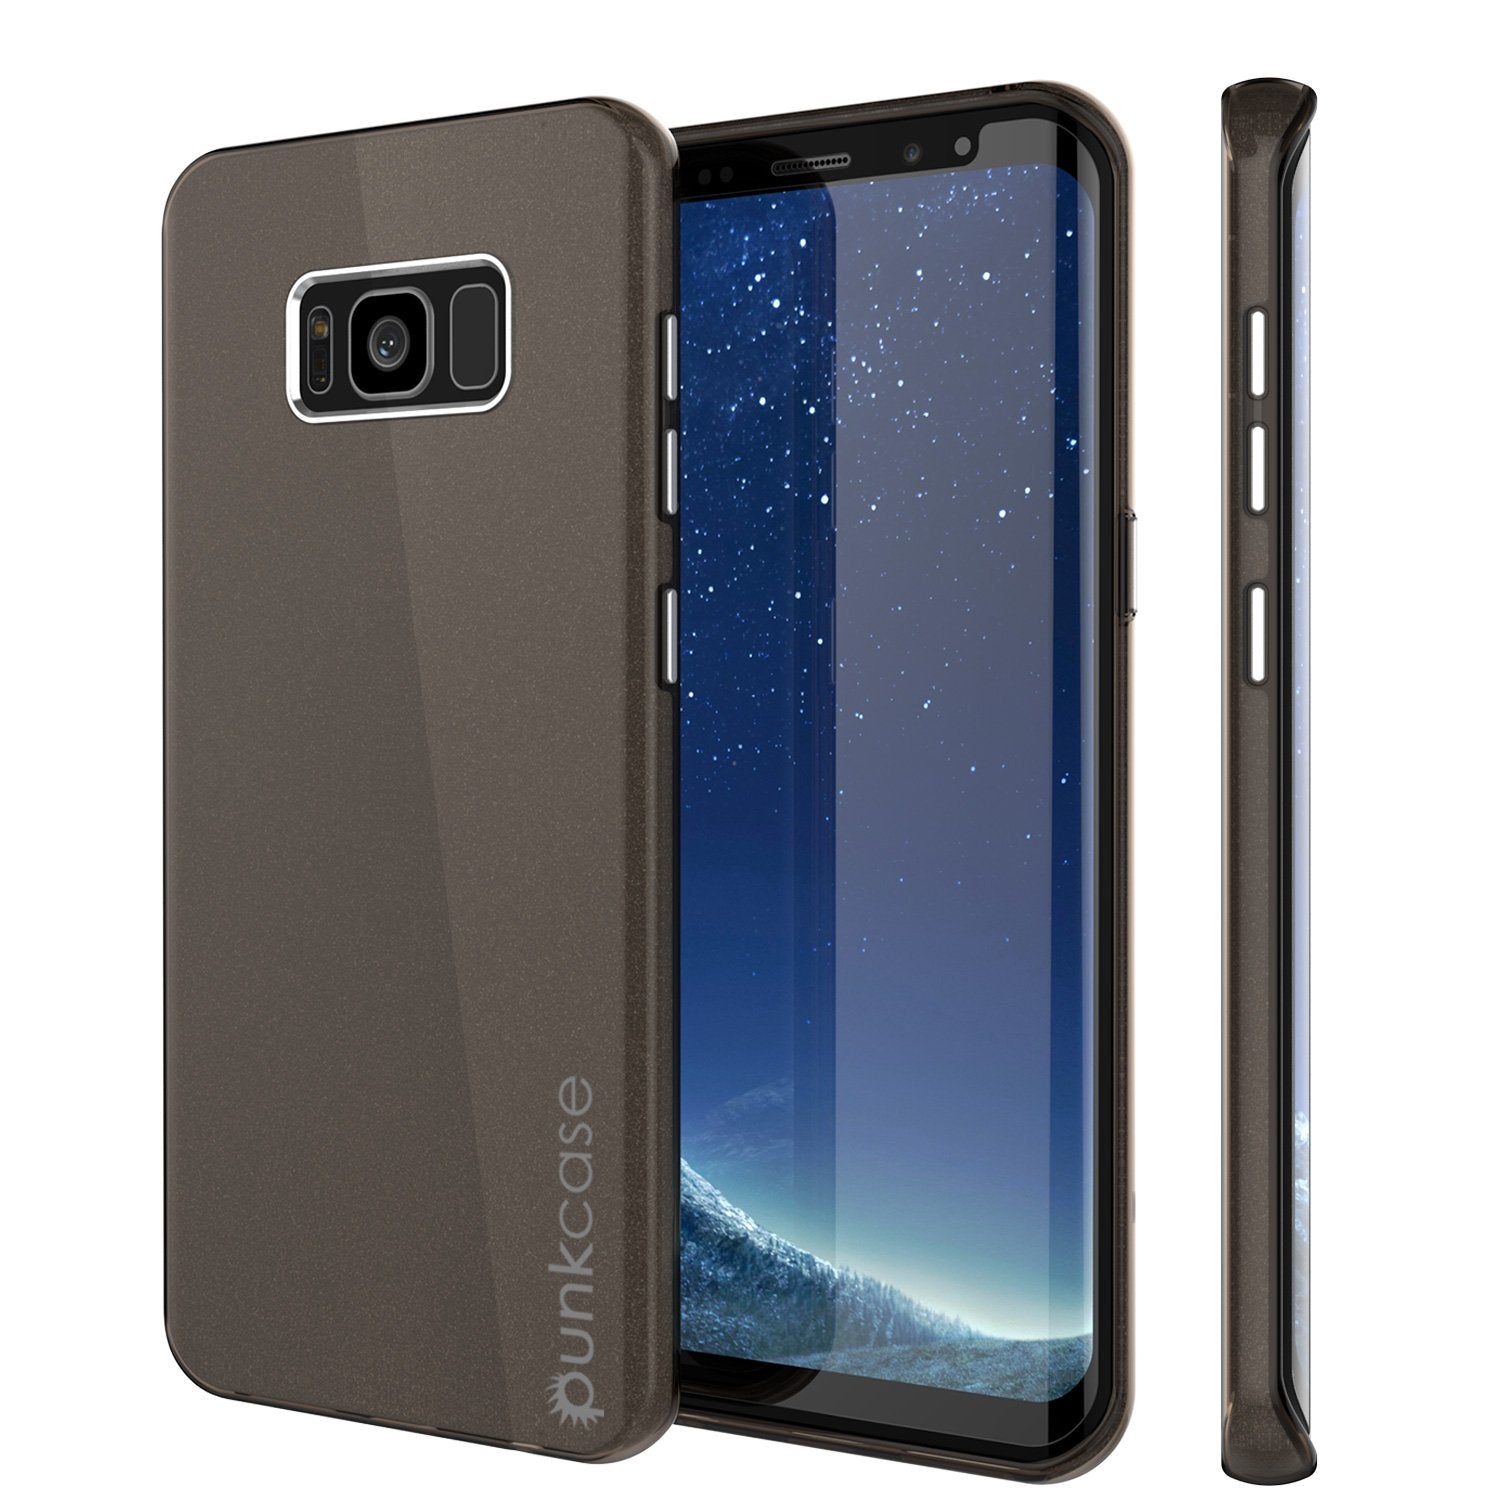 Galaxy S8 Case, Punkcase Galactic 2.0 Series Ultra Slim Protective Armor TPU Cover w/ PunkShield Screen Protector | Lifetime Exchange Warranty | Designed for Samsung Galaxy S8 [Black/grey]